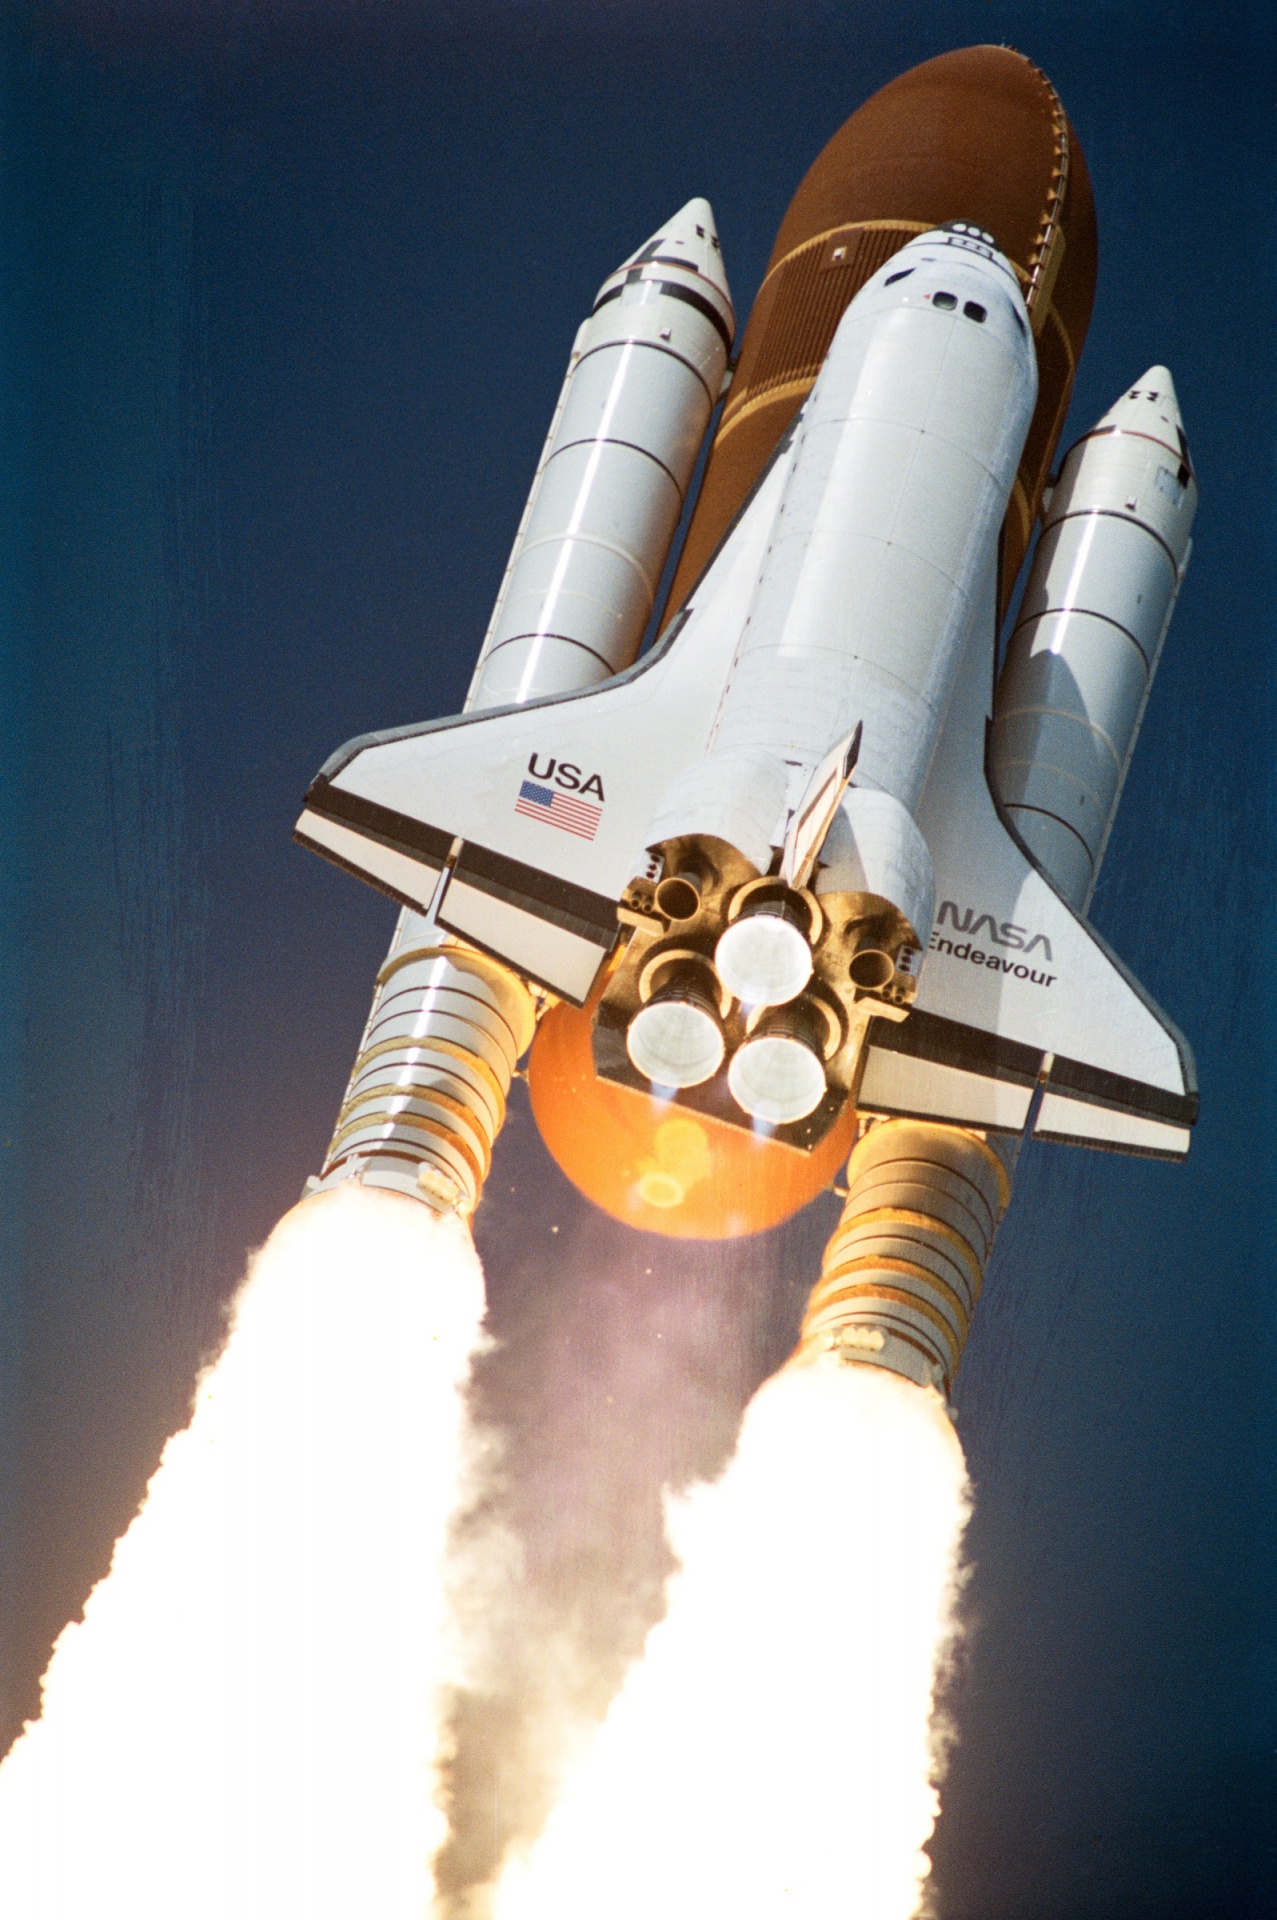 pics of space shuttle endeavour